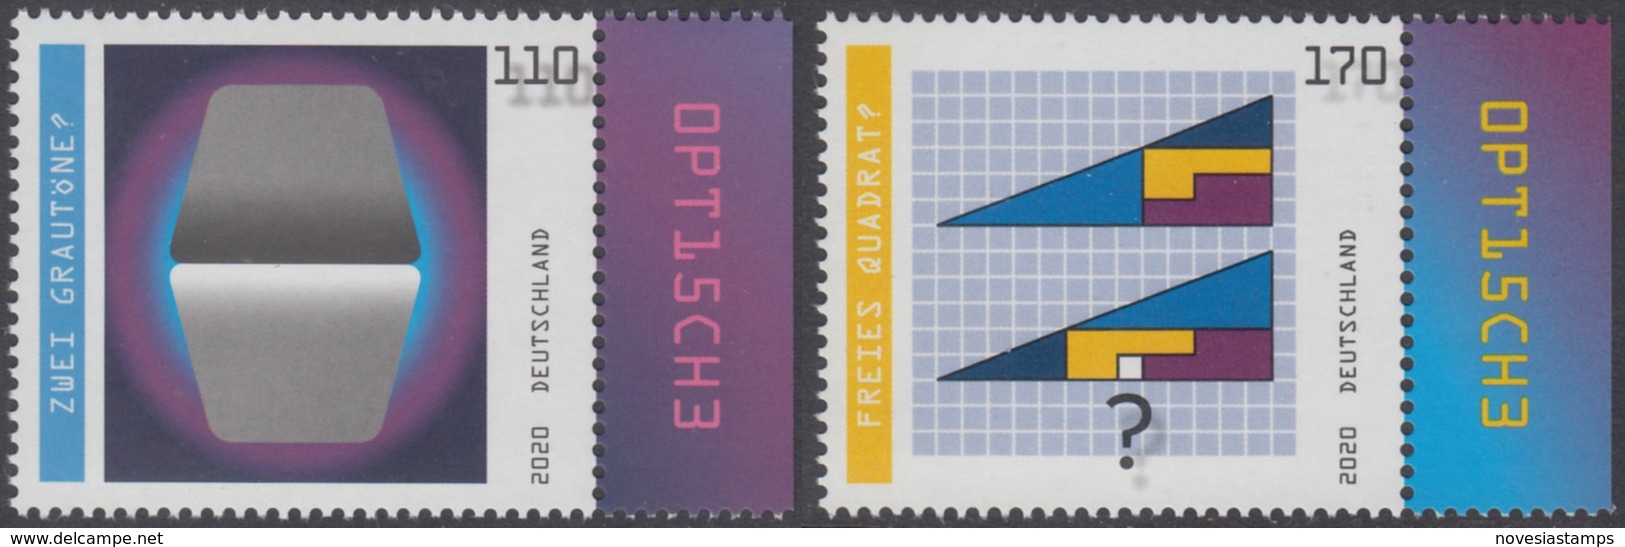 !a! GERMANY 2020 Mi. 3536-3537 MNH SET Of 2 SINGLES W/ Right Margins (a) - Optical Illusions - Unused Stamps